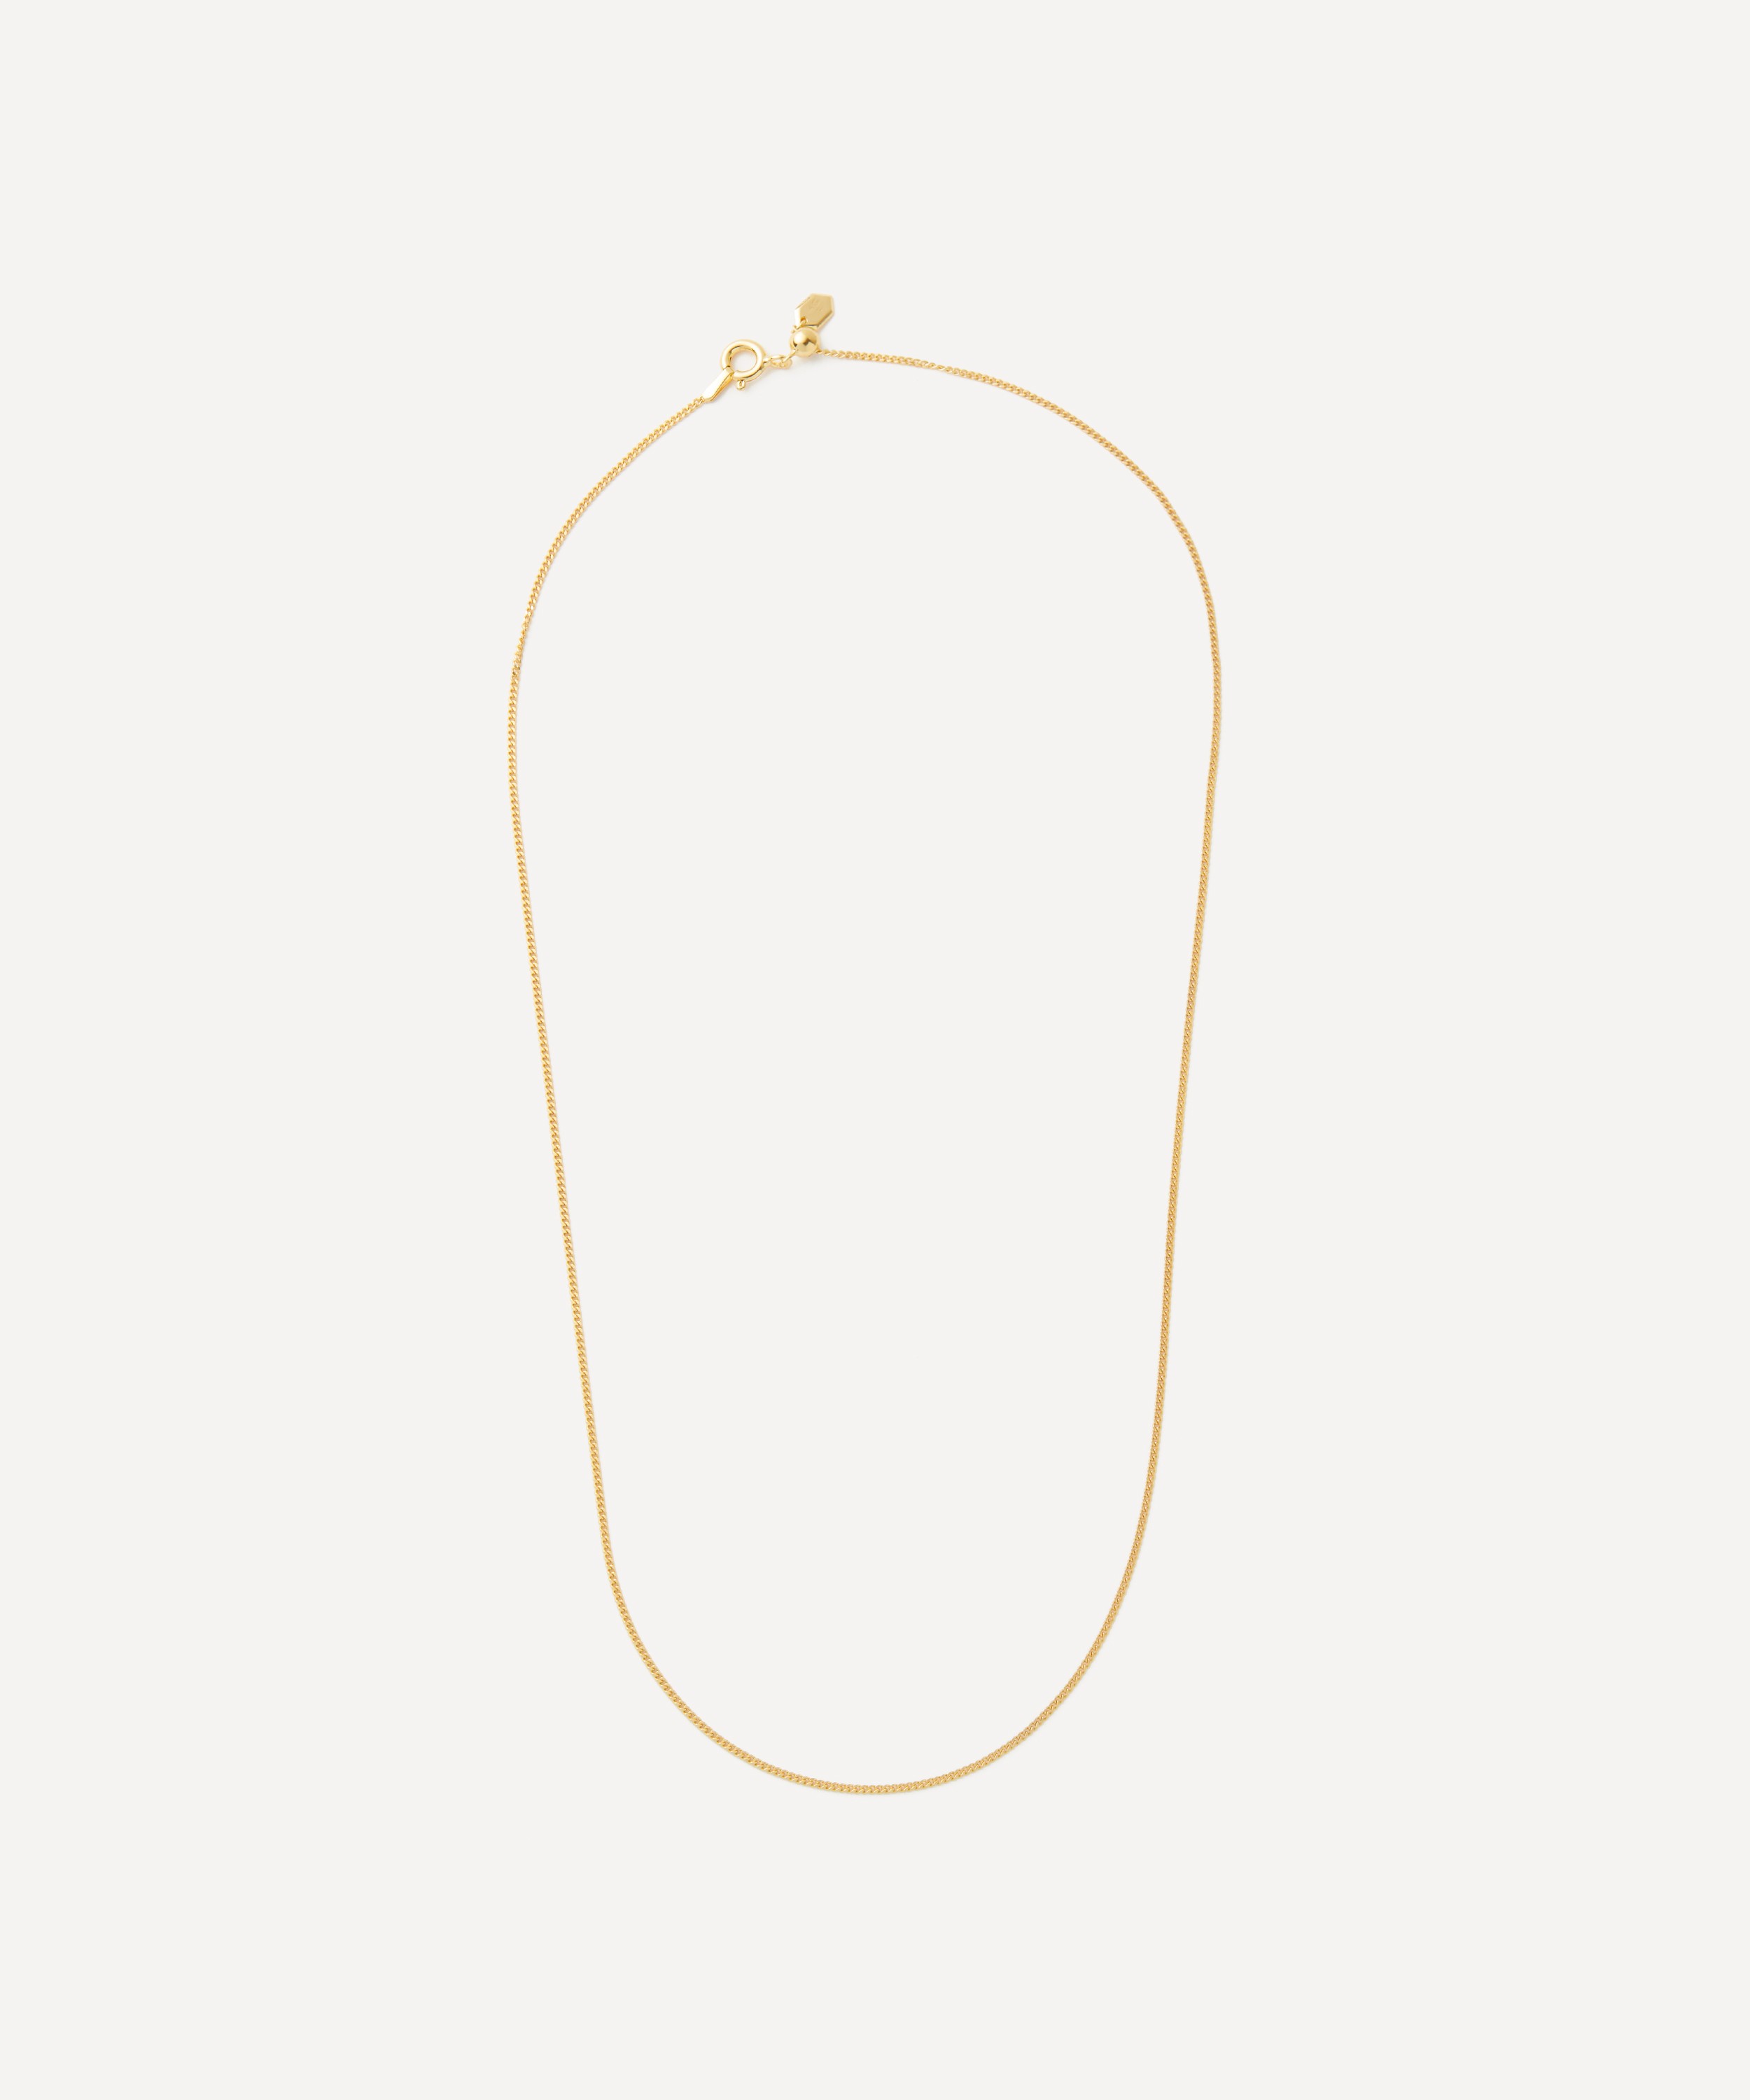 Maria Black - 18ct Gold-Plated Nyhavn Chain Necklace